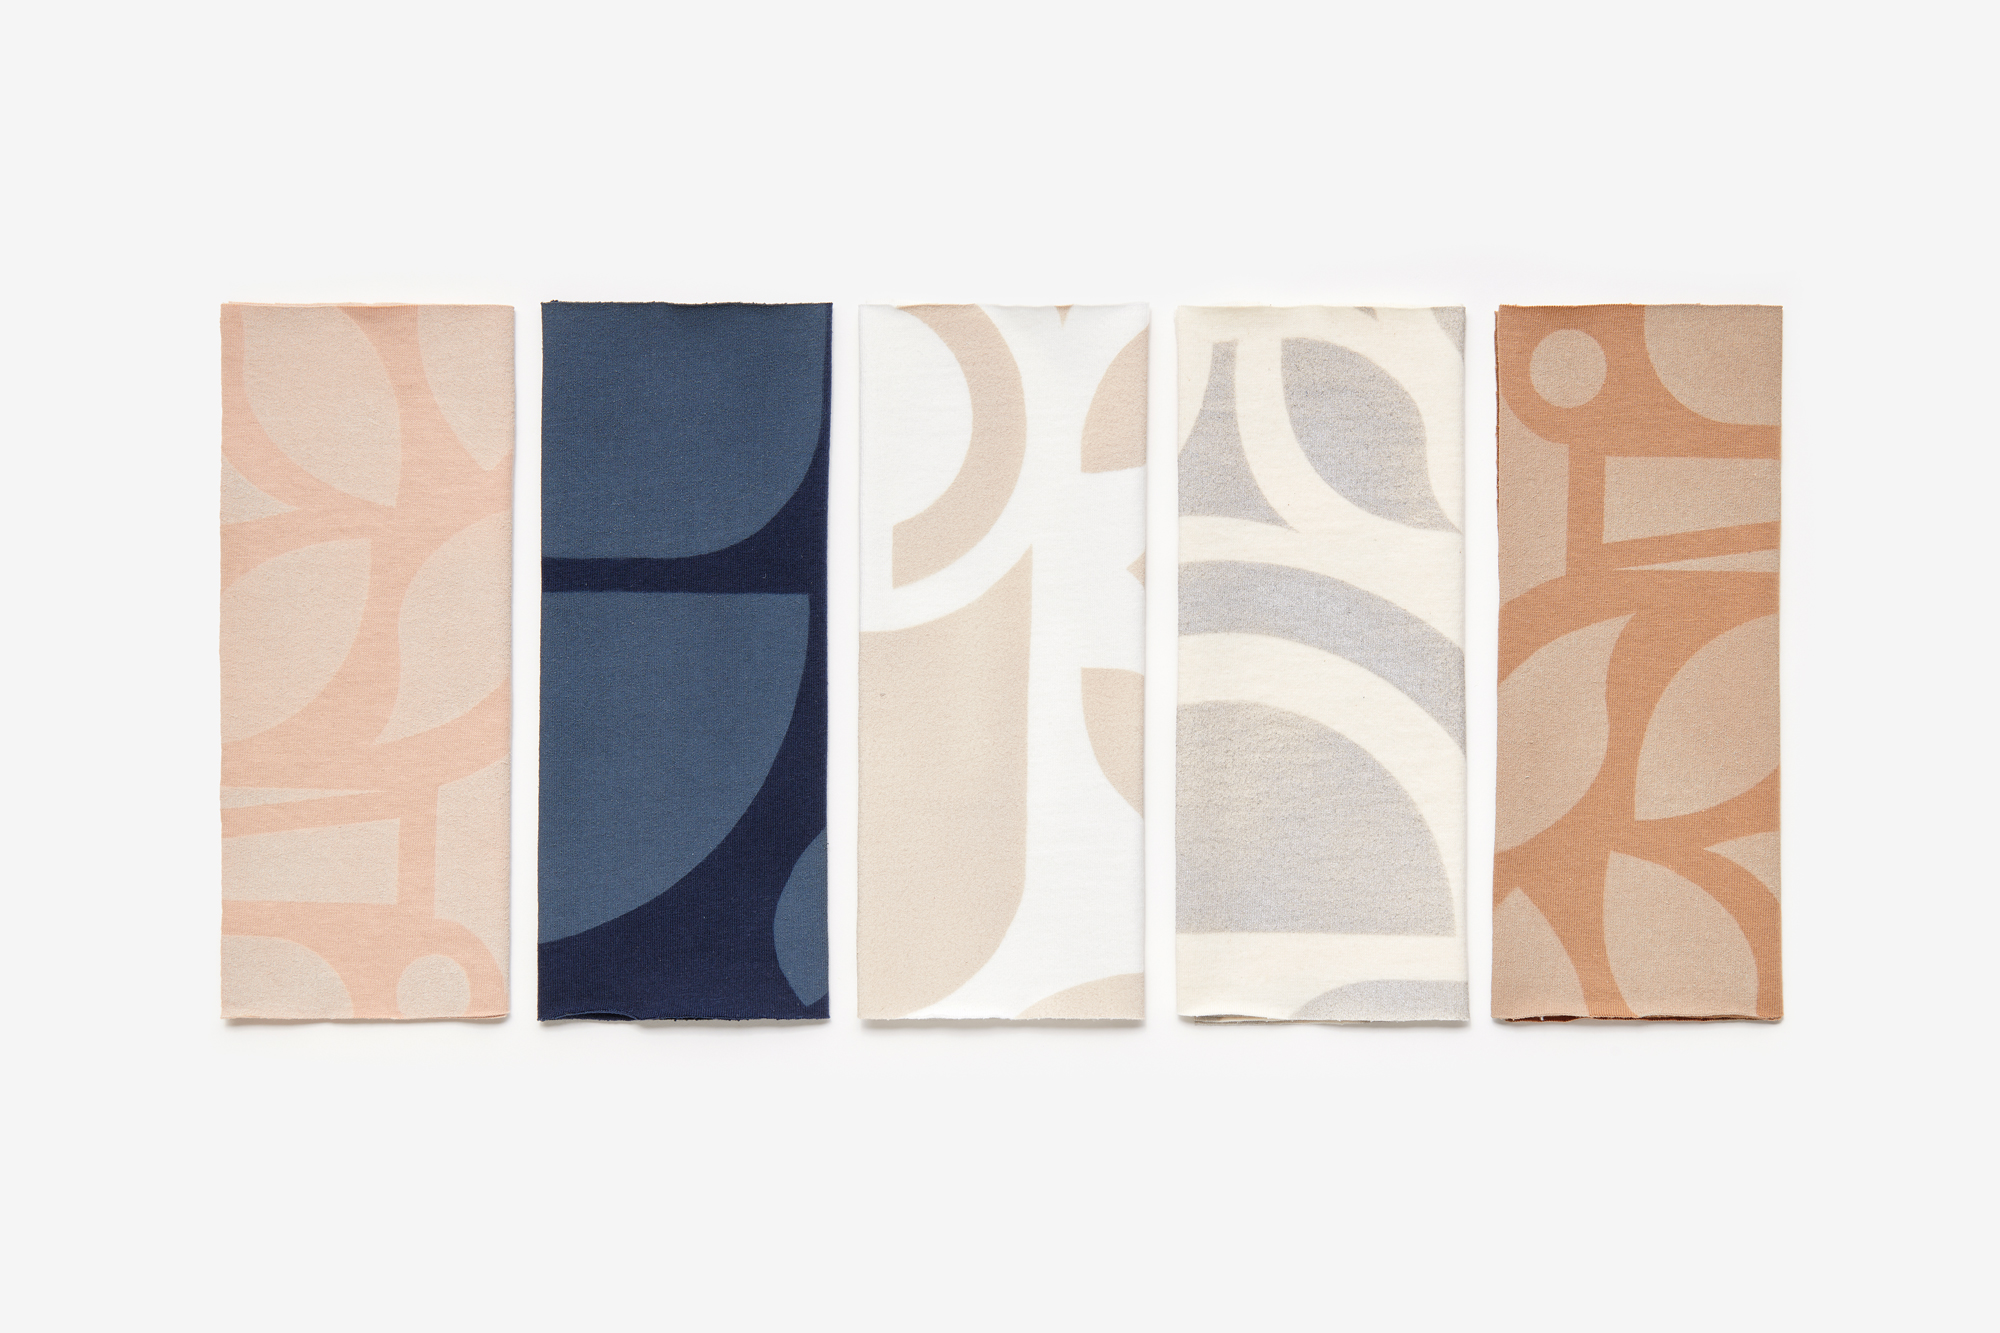 Fabric swatches in Ballet, Navy, White, Natural, and Camel, stenciled with the Abstract design.